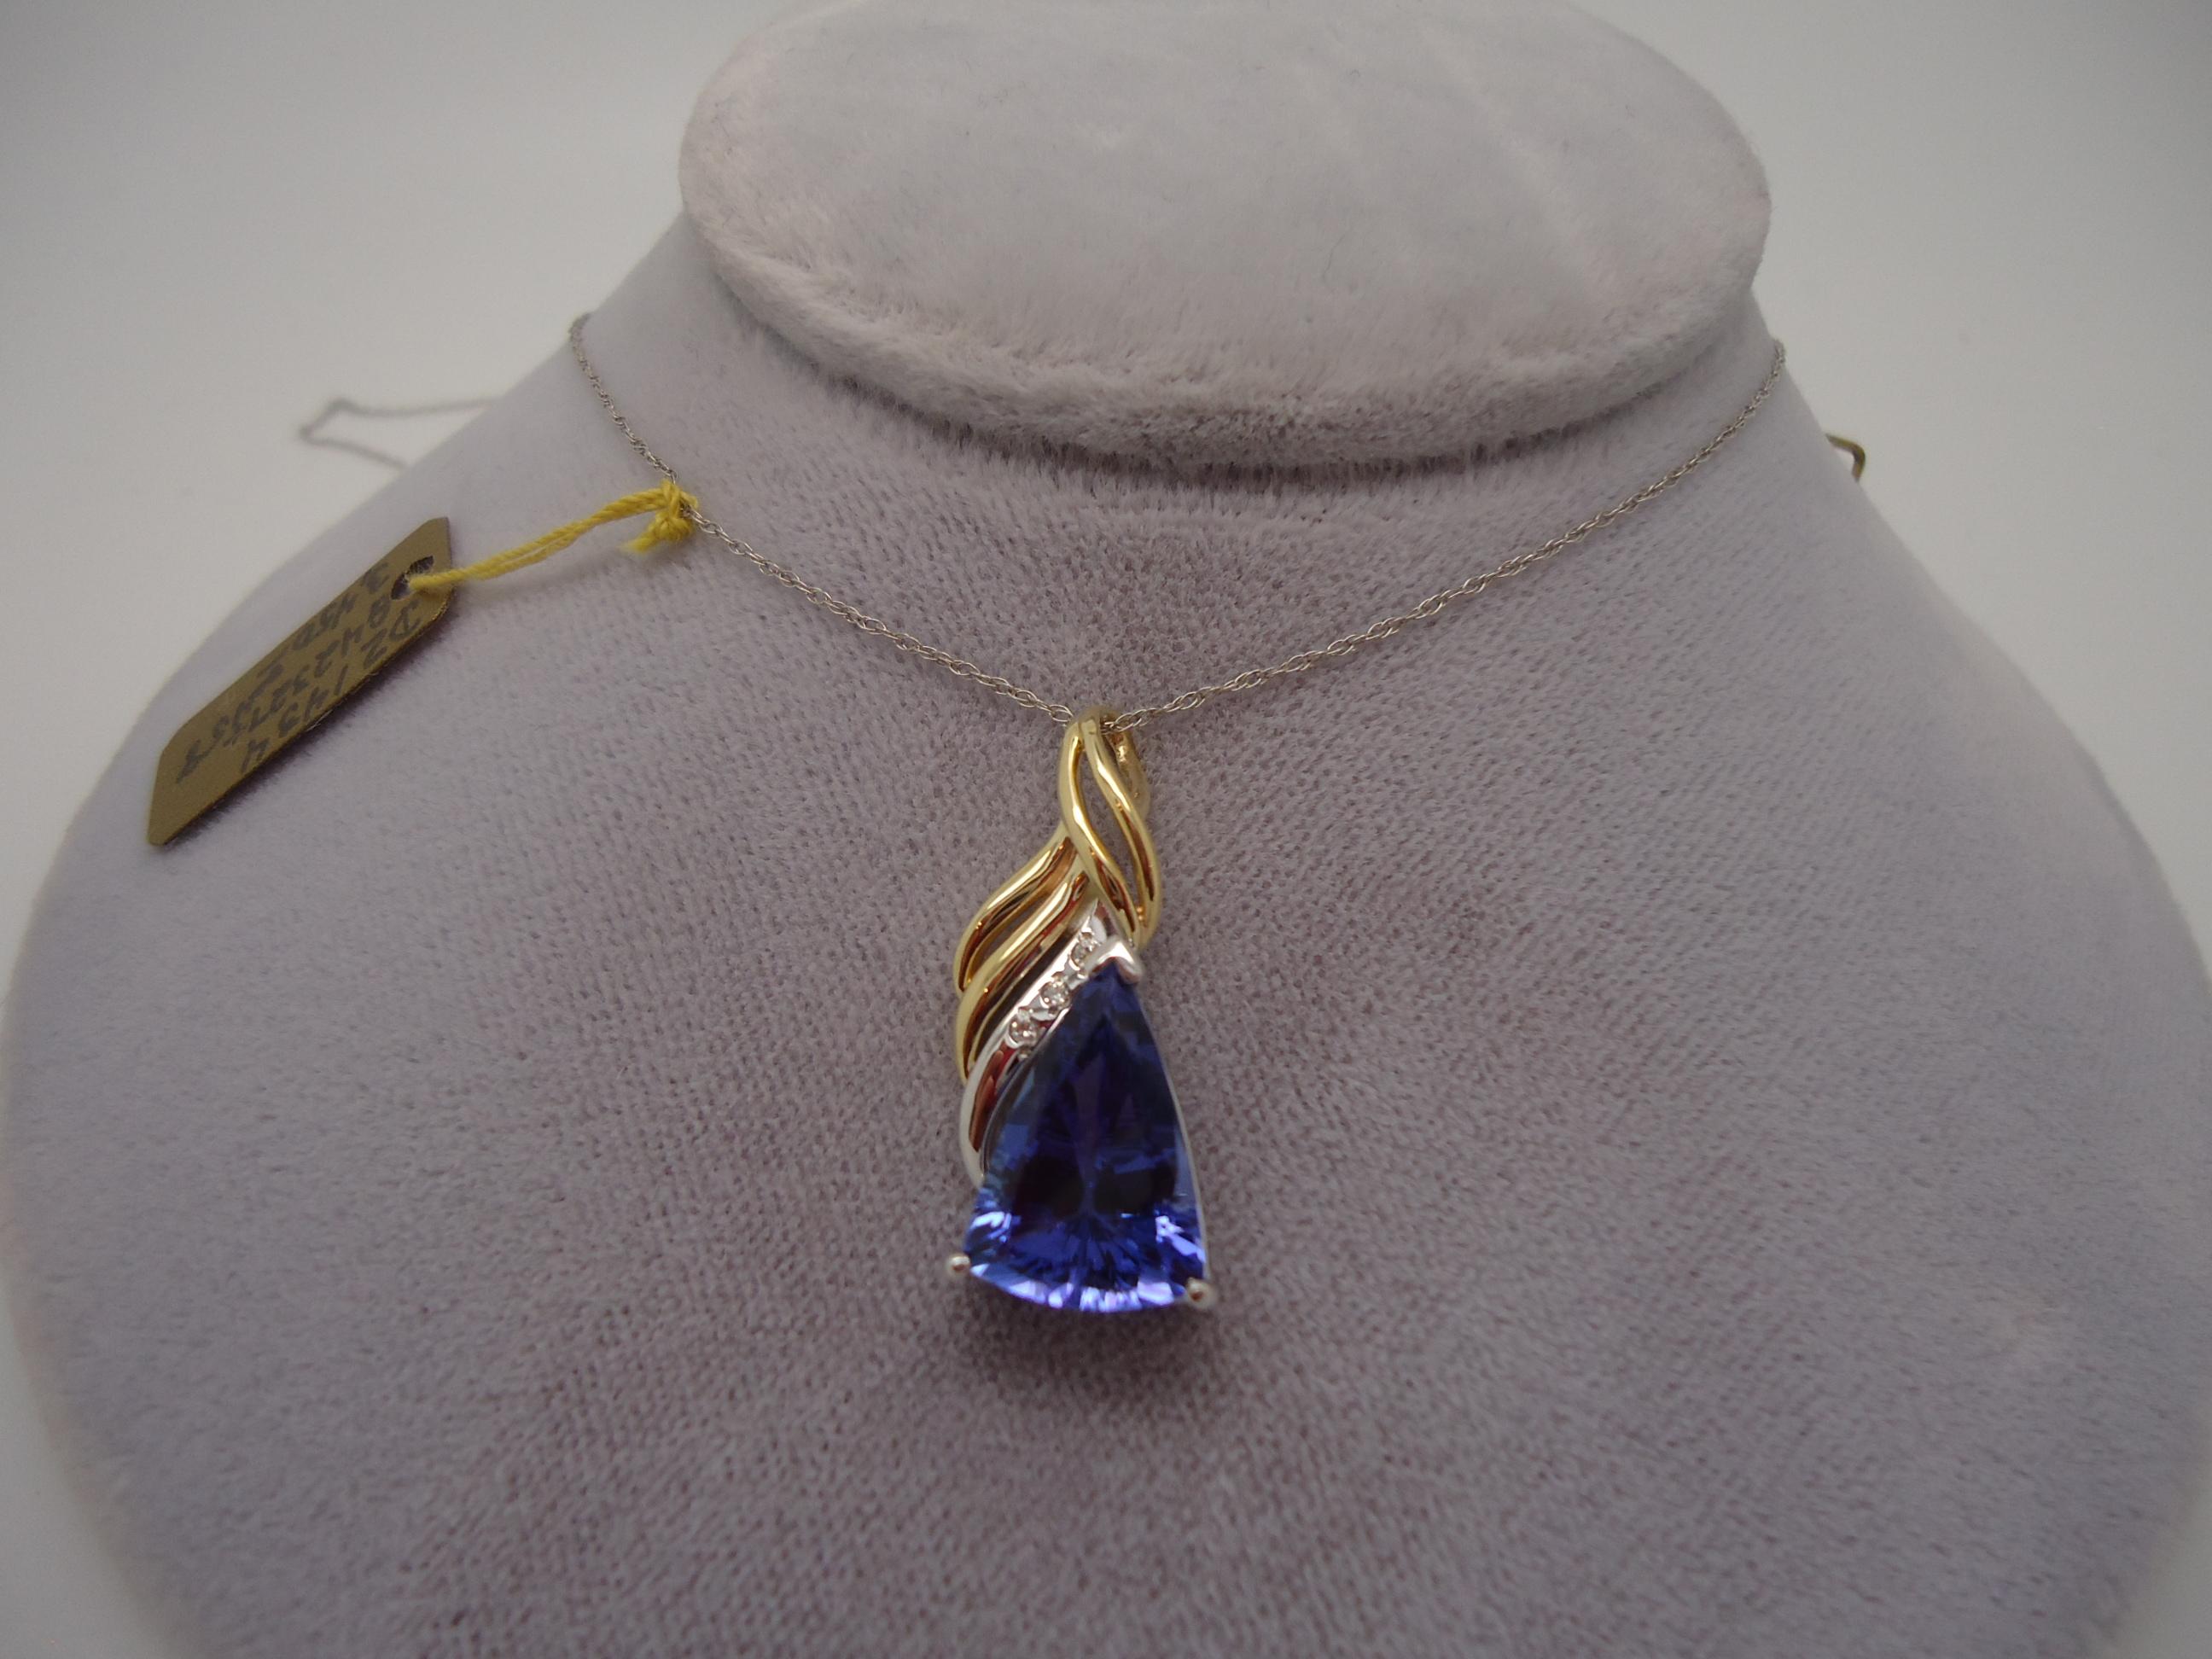 14k Gold 3.47ct Trillion Genuine Natural Tanzanite Pendant with Diamonds (#718)

14k white and gold necklace with a 3.47ct trillion shape tanzanite which measures 14x9mm. The necklace also has small diamonds that are 1mm. The tanzanite has an eye